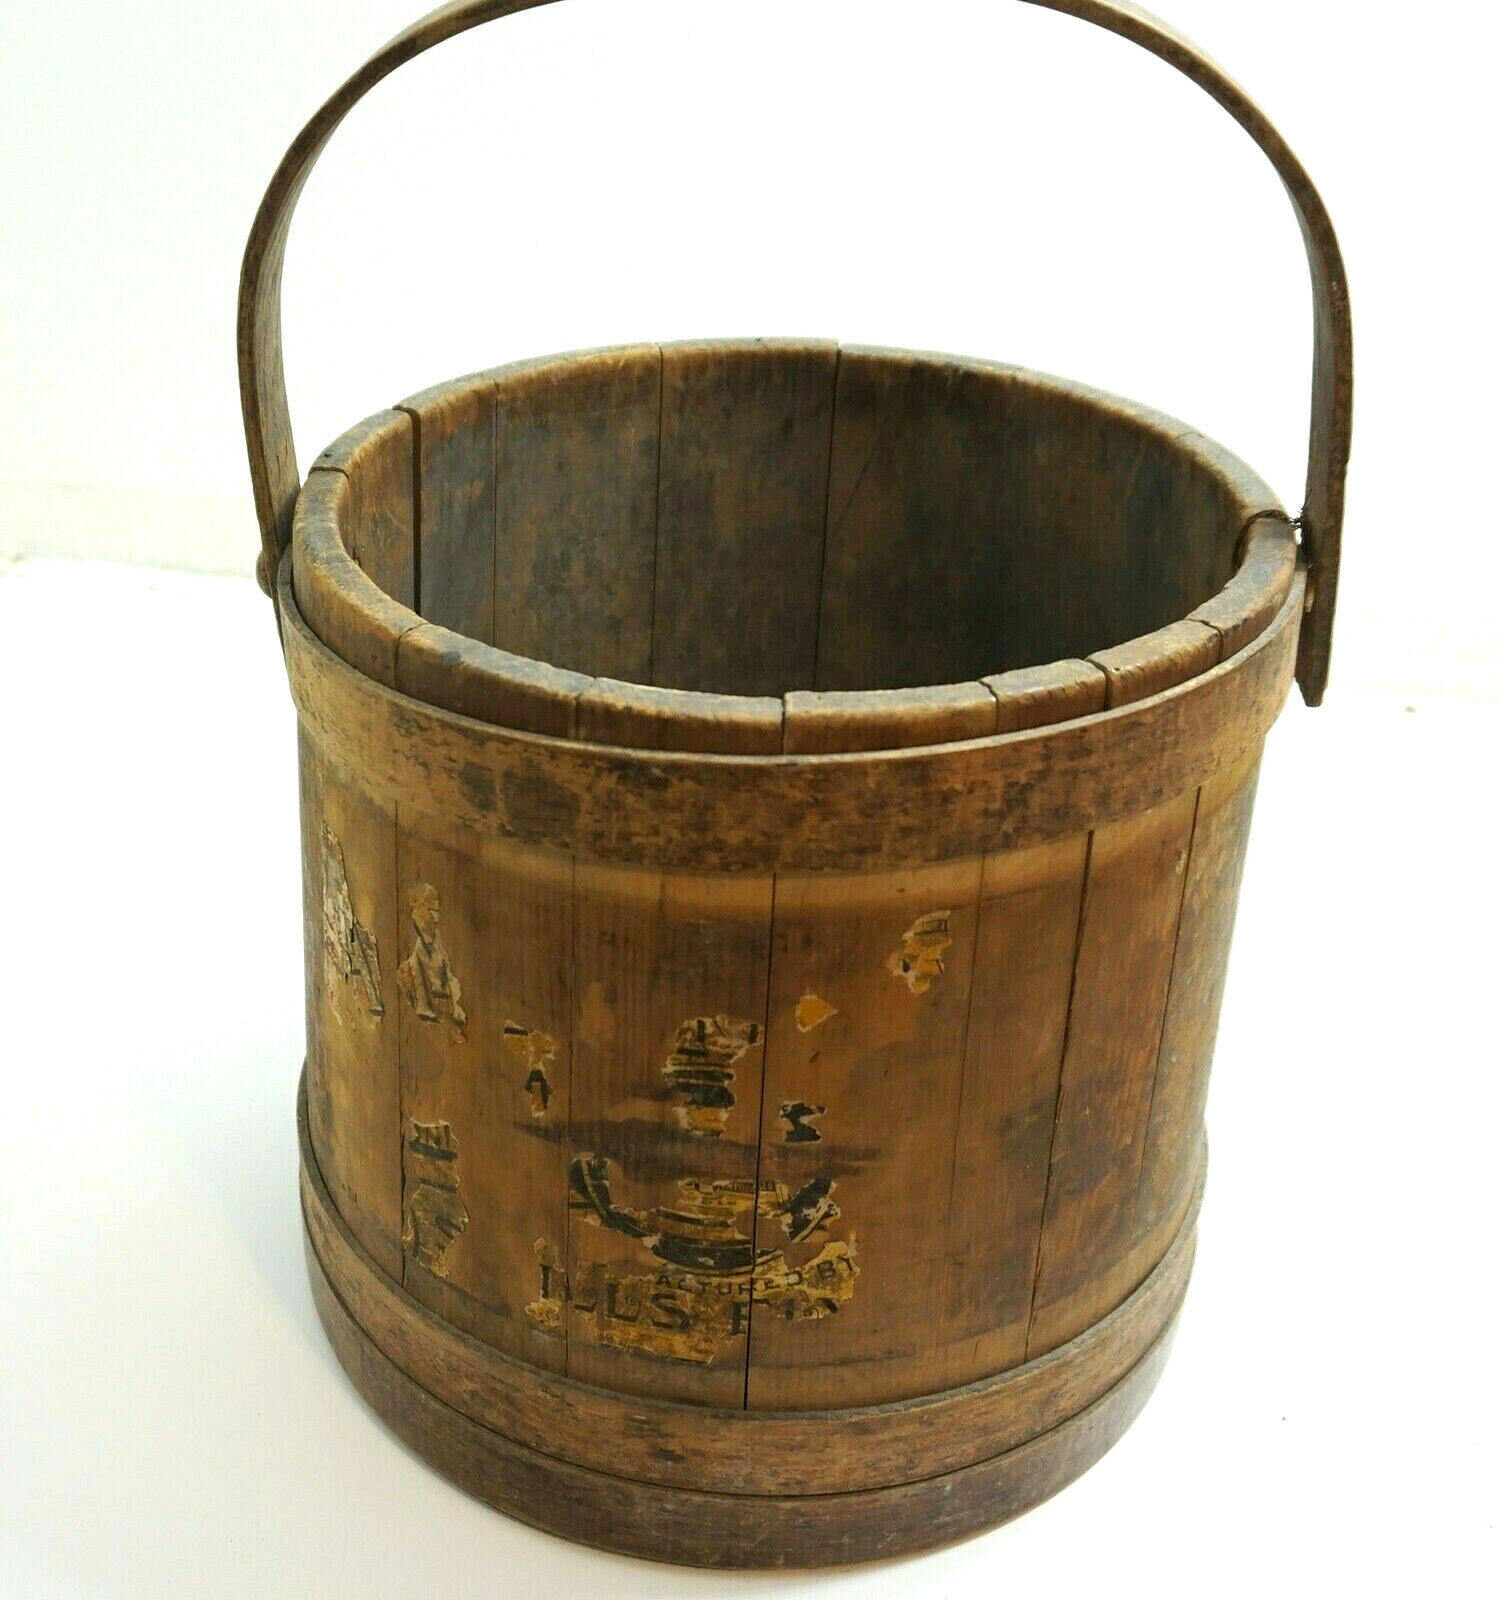 ANTIQUE WOOD AND WOODEN STRAP FIRKIN BUCKET PARTIAL PAPERL LABEL ~ WOOD HANDLE